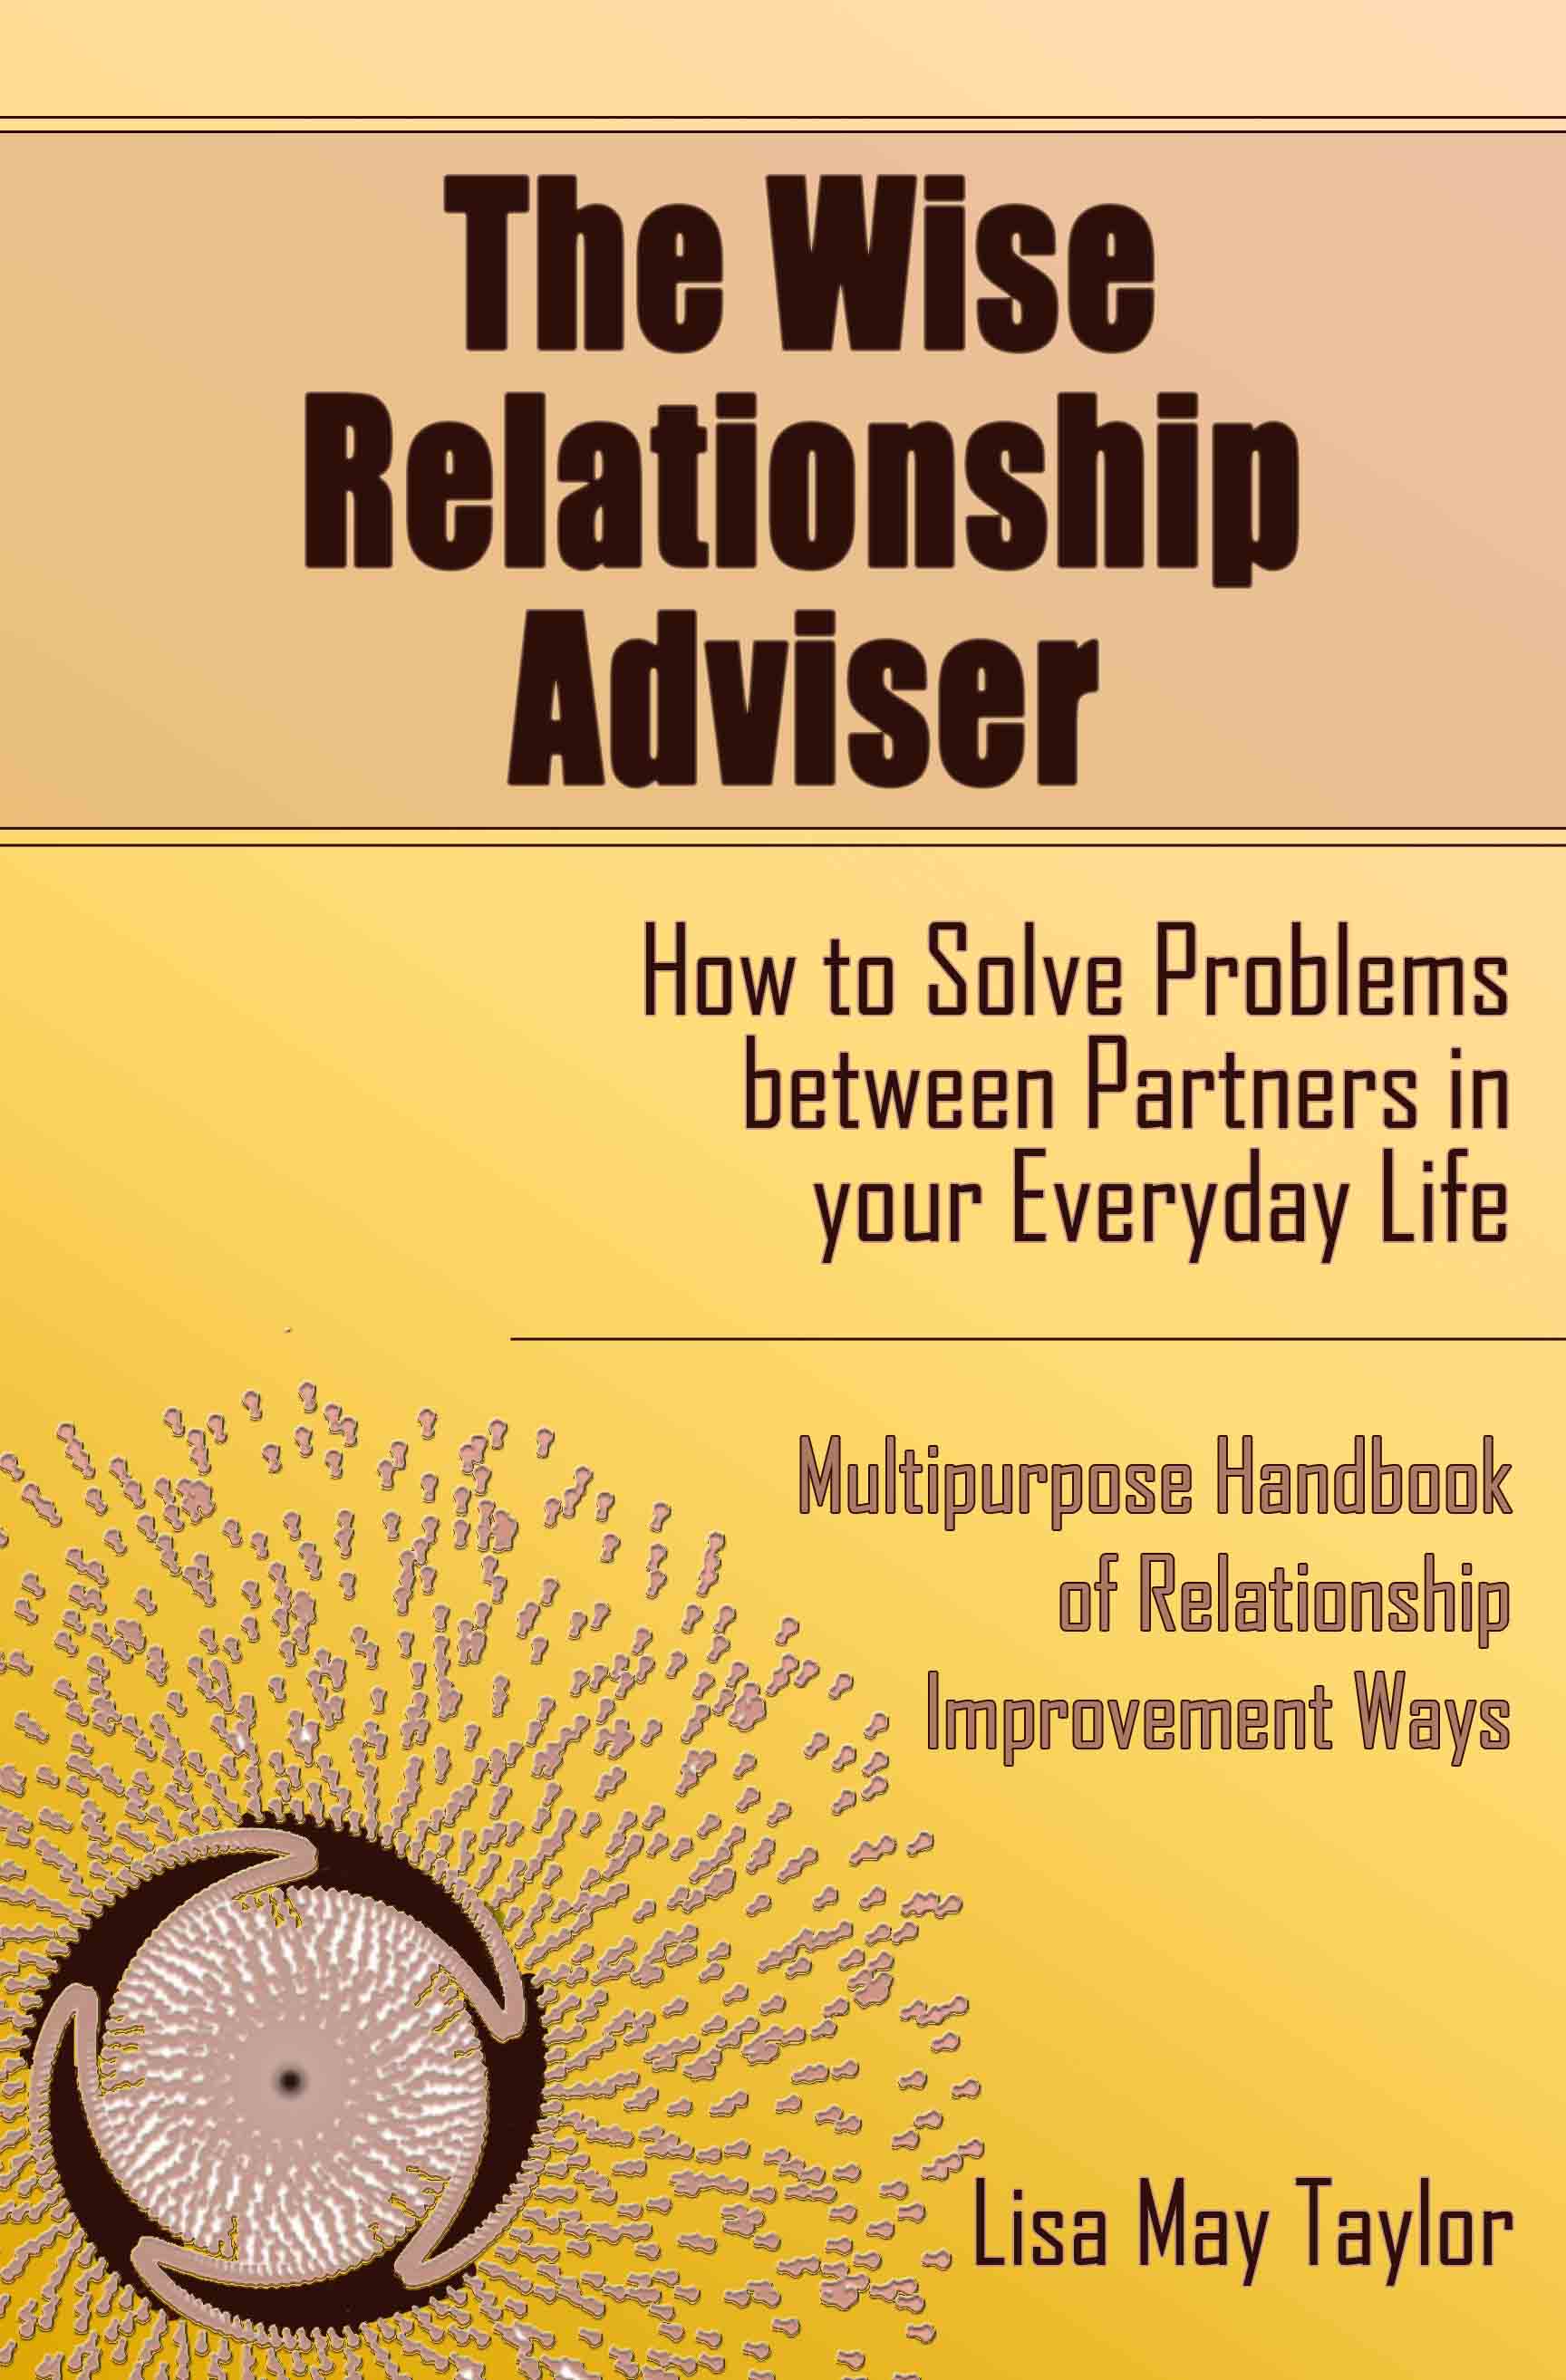 FREE: The Wise Relationship Adviser – How to Solve Problems between Partners in Your Everyday Life: Multipurpose Handbook of Relationship Improvement Ways by Lisa May Taylor by Lisa May Taylor